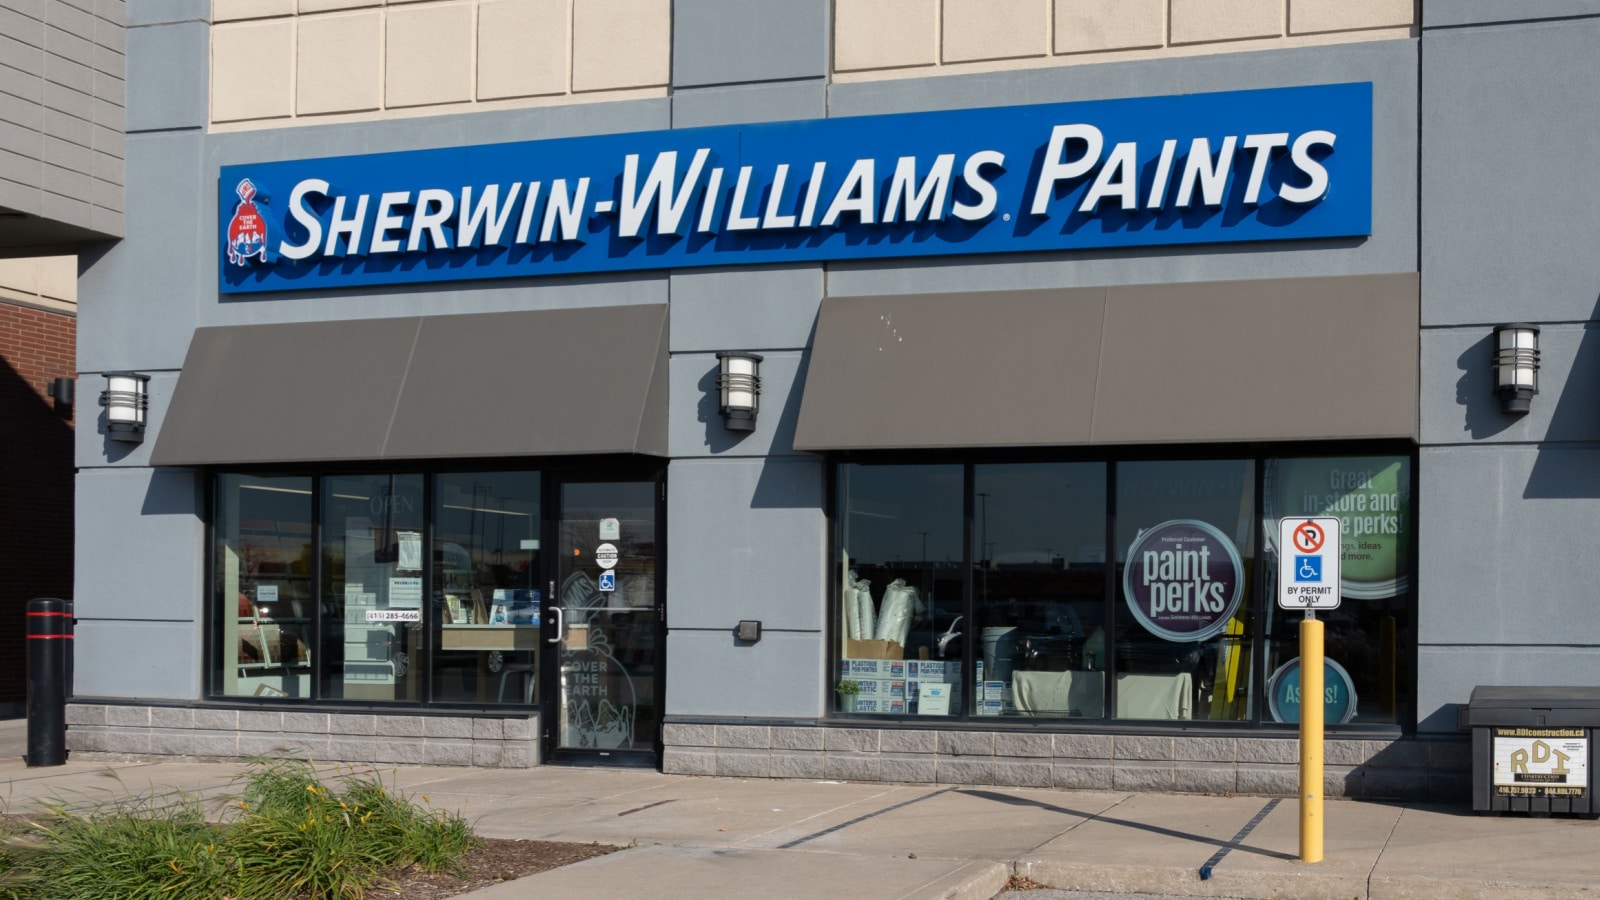 Scarborough, Toronto, Canada - November 6, 2021: A Sherwin-Williams Paint Store in Toronto. Sherwin-Williams is an American company that produces paint.